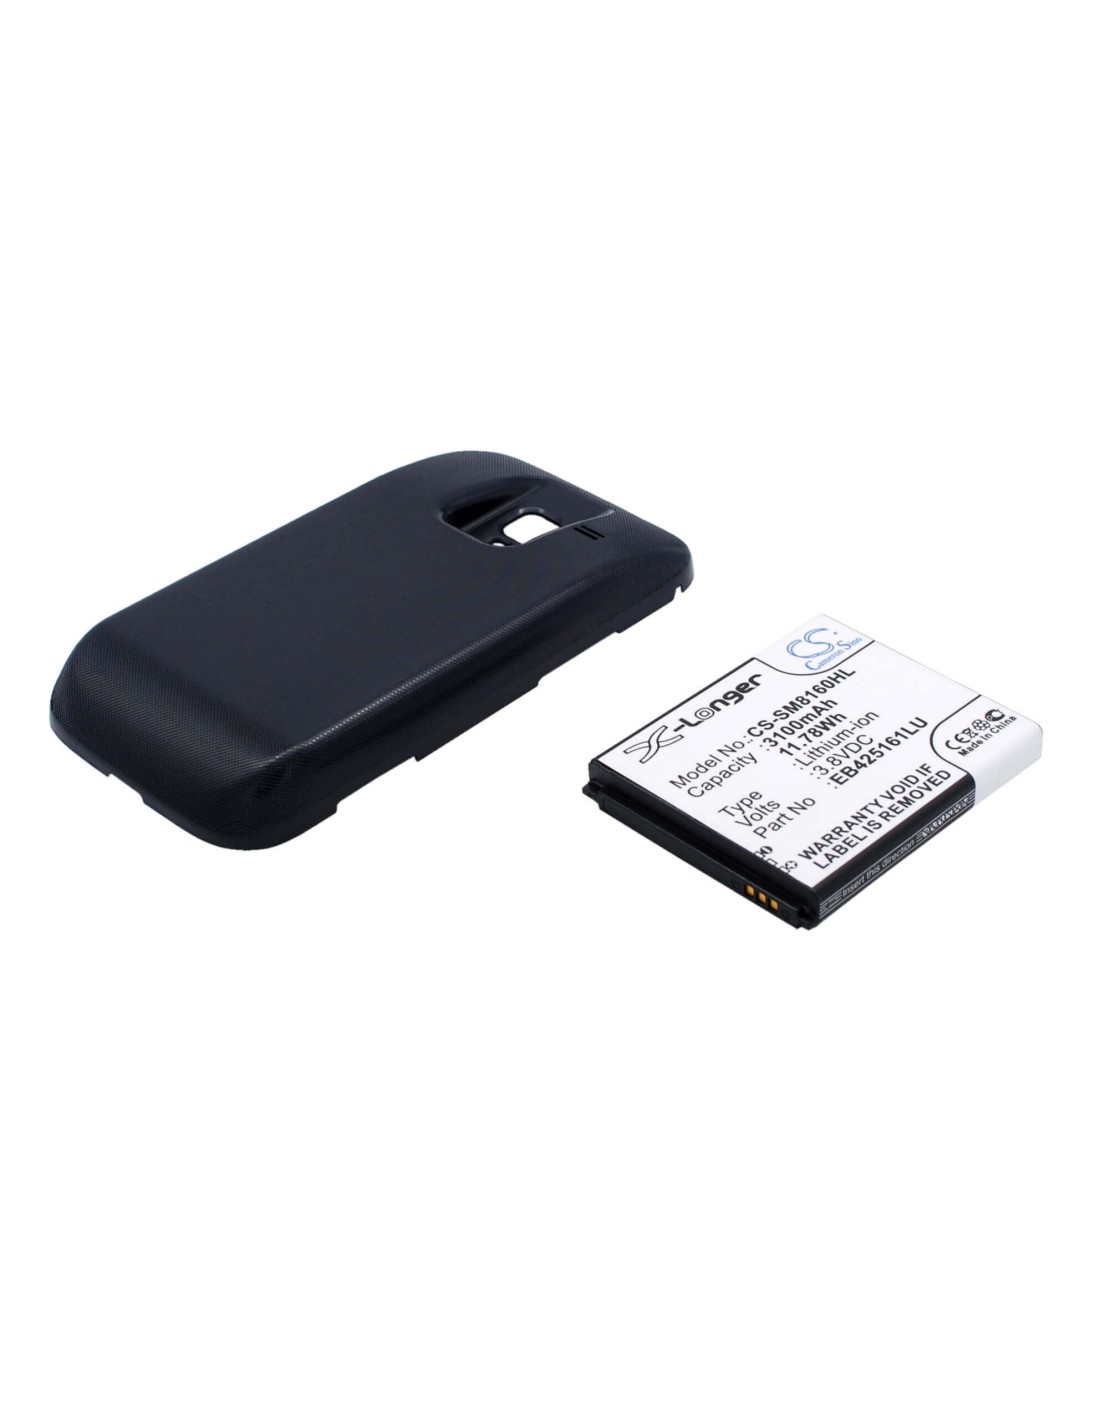 Battery for Samsung Galaxy Ace 2, GT-I8160, GT-I8160P, with blue back cover 3.8V, 3500mAh - 13.30Wh